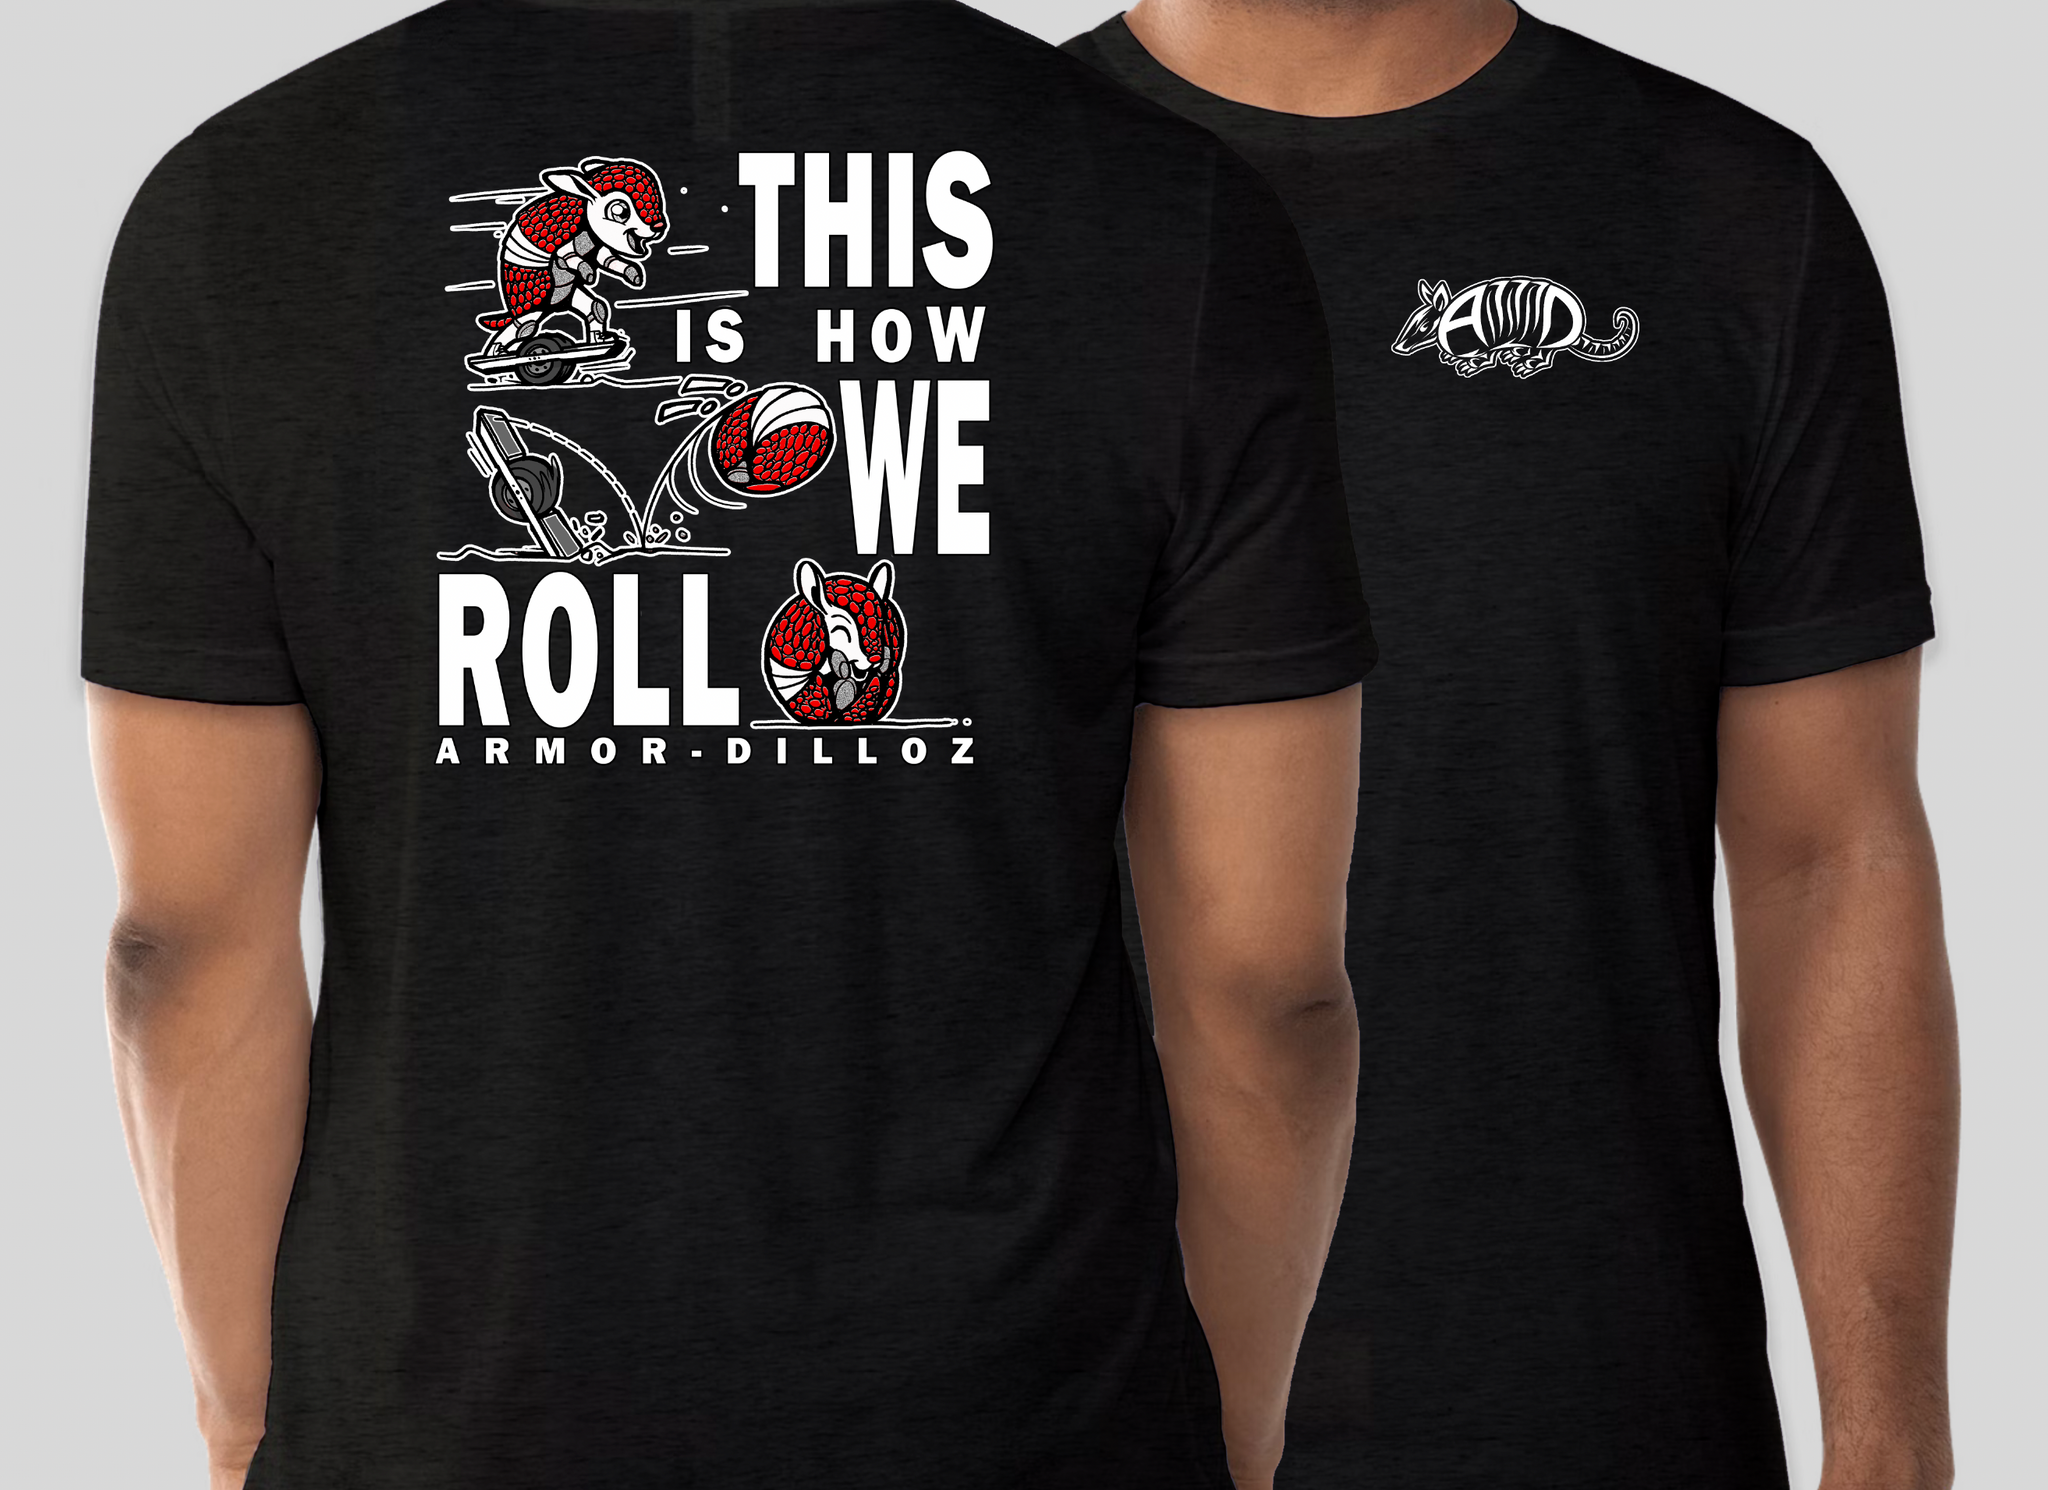 This Is How We Roll - T-Shirt